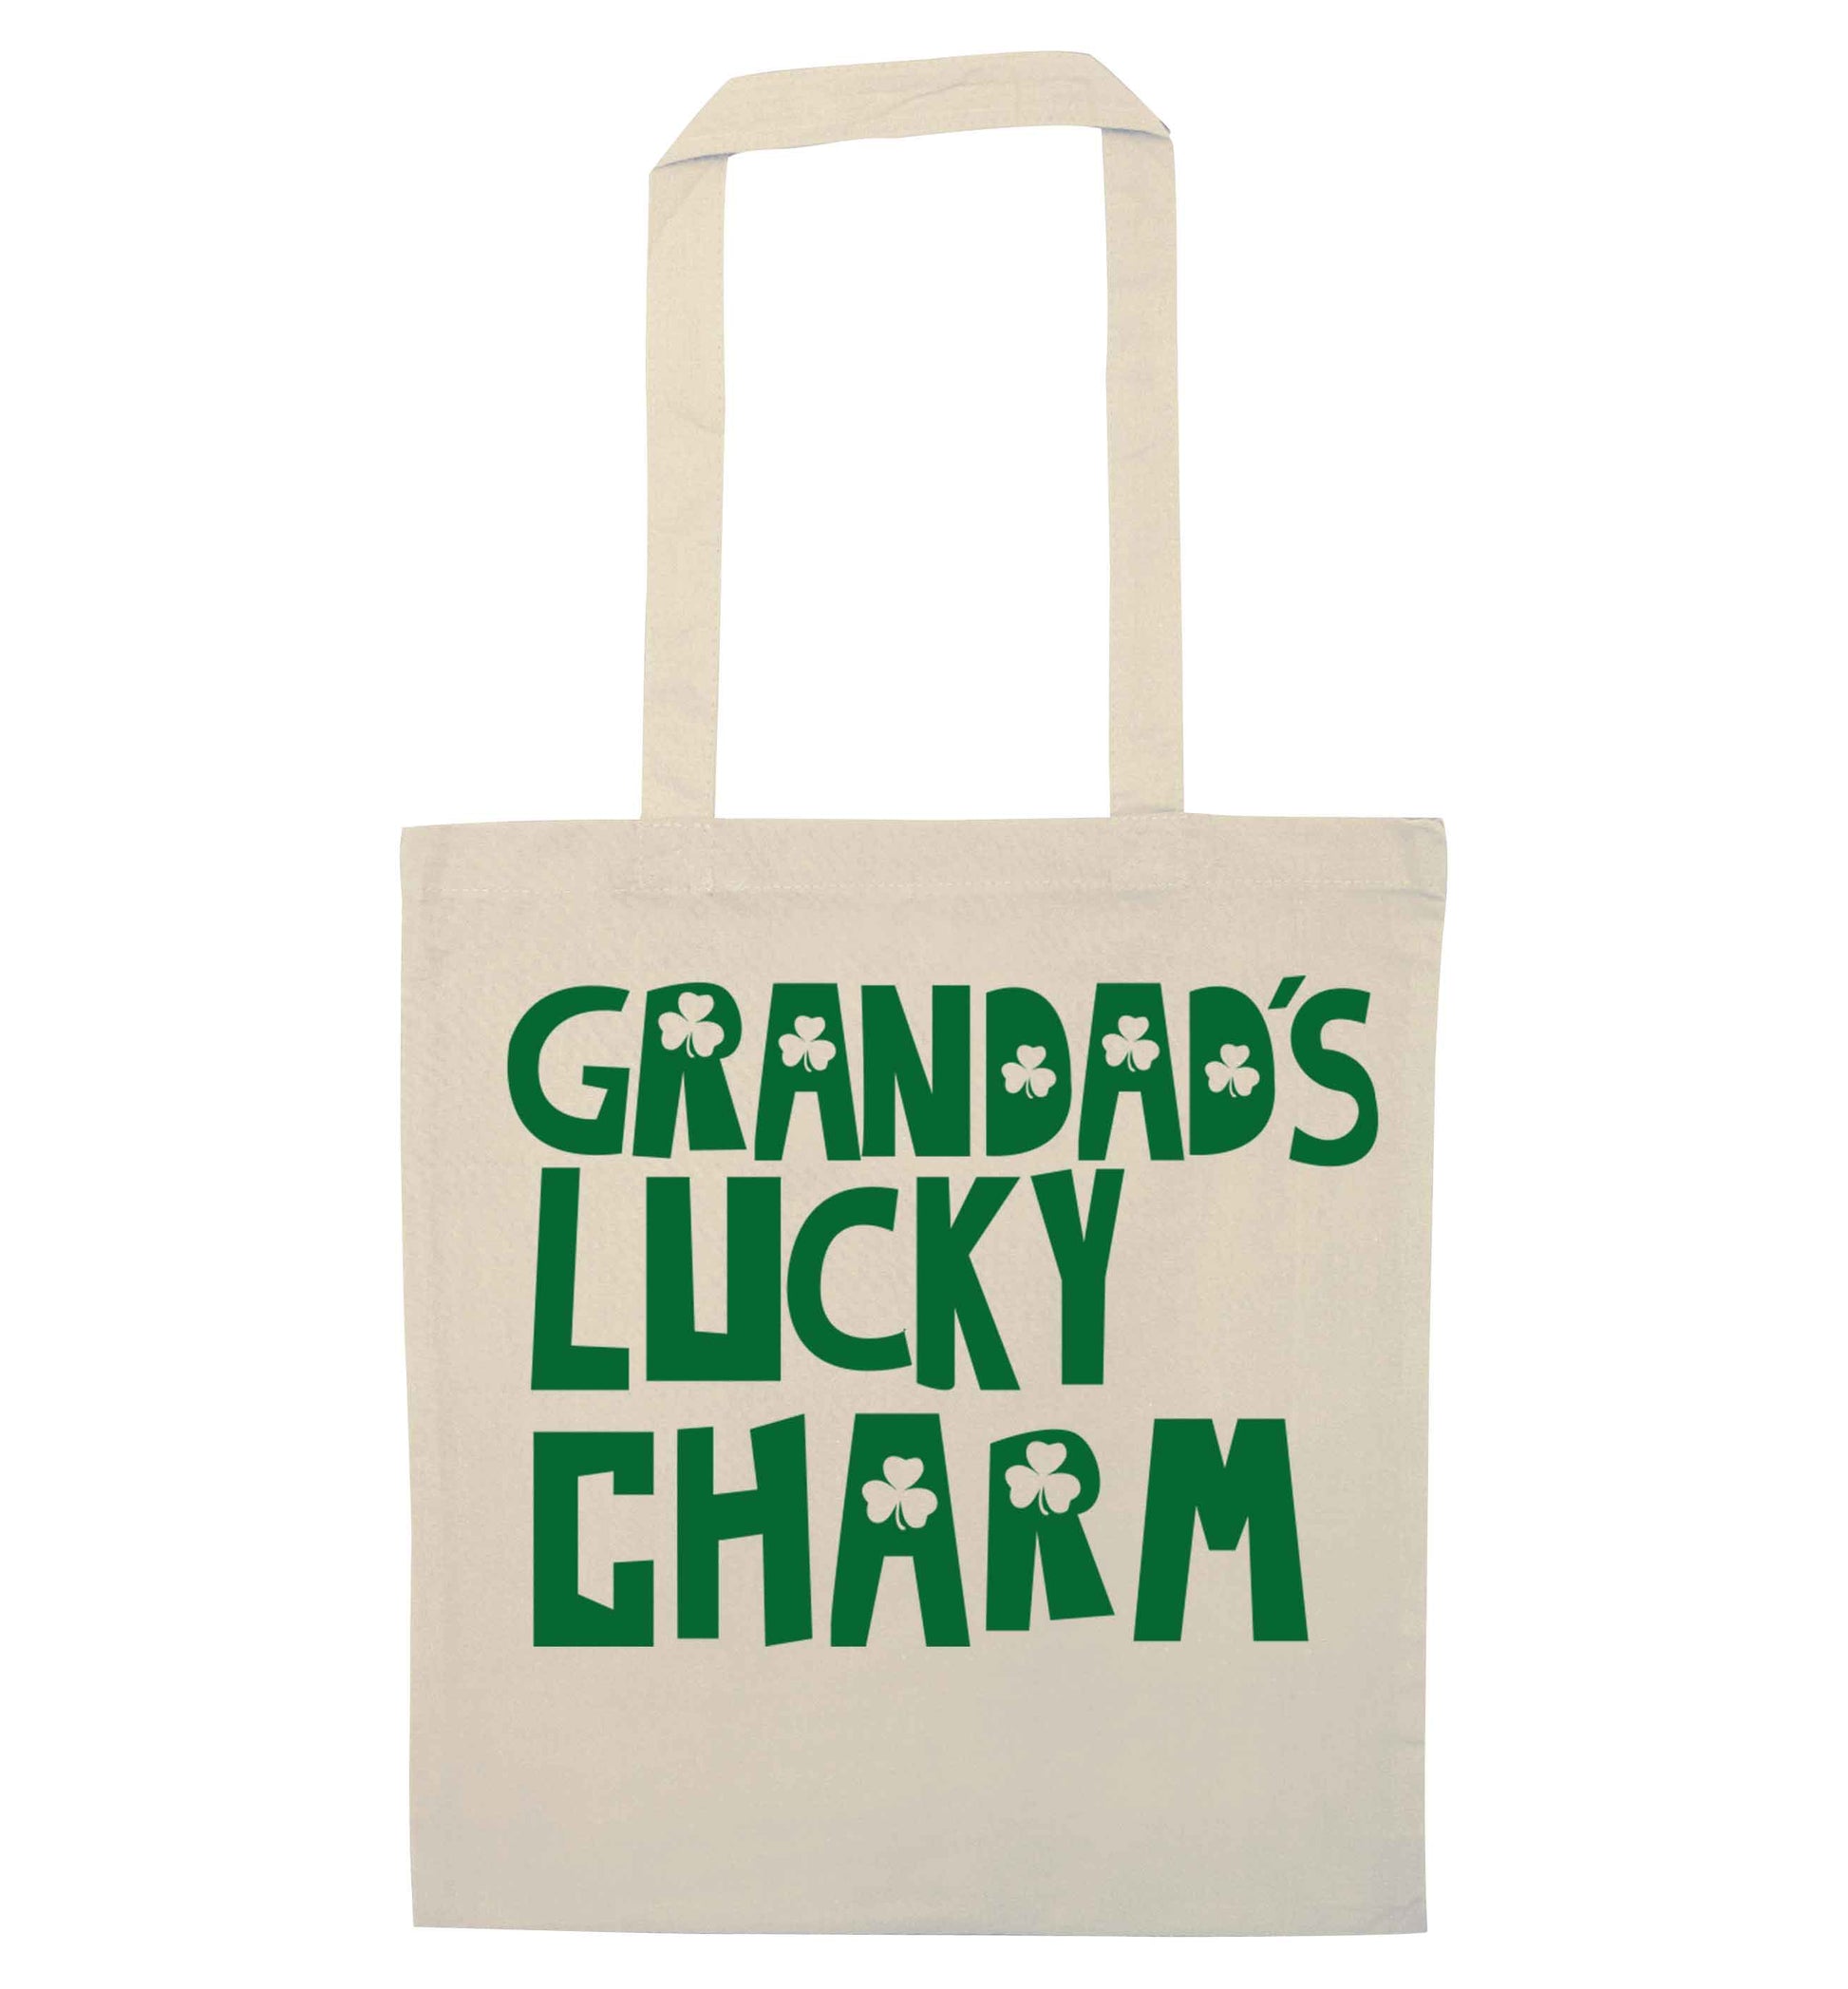 Grandad's lucky charm  natural tote bag